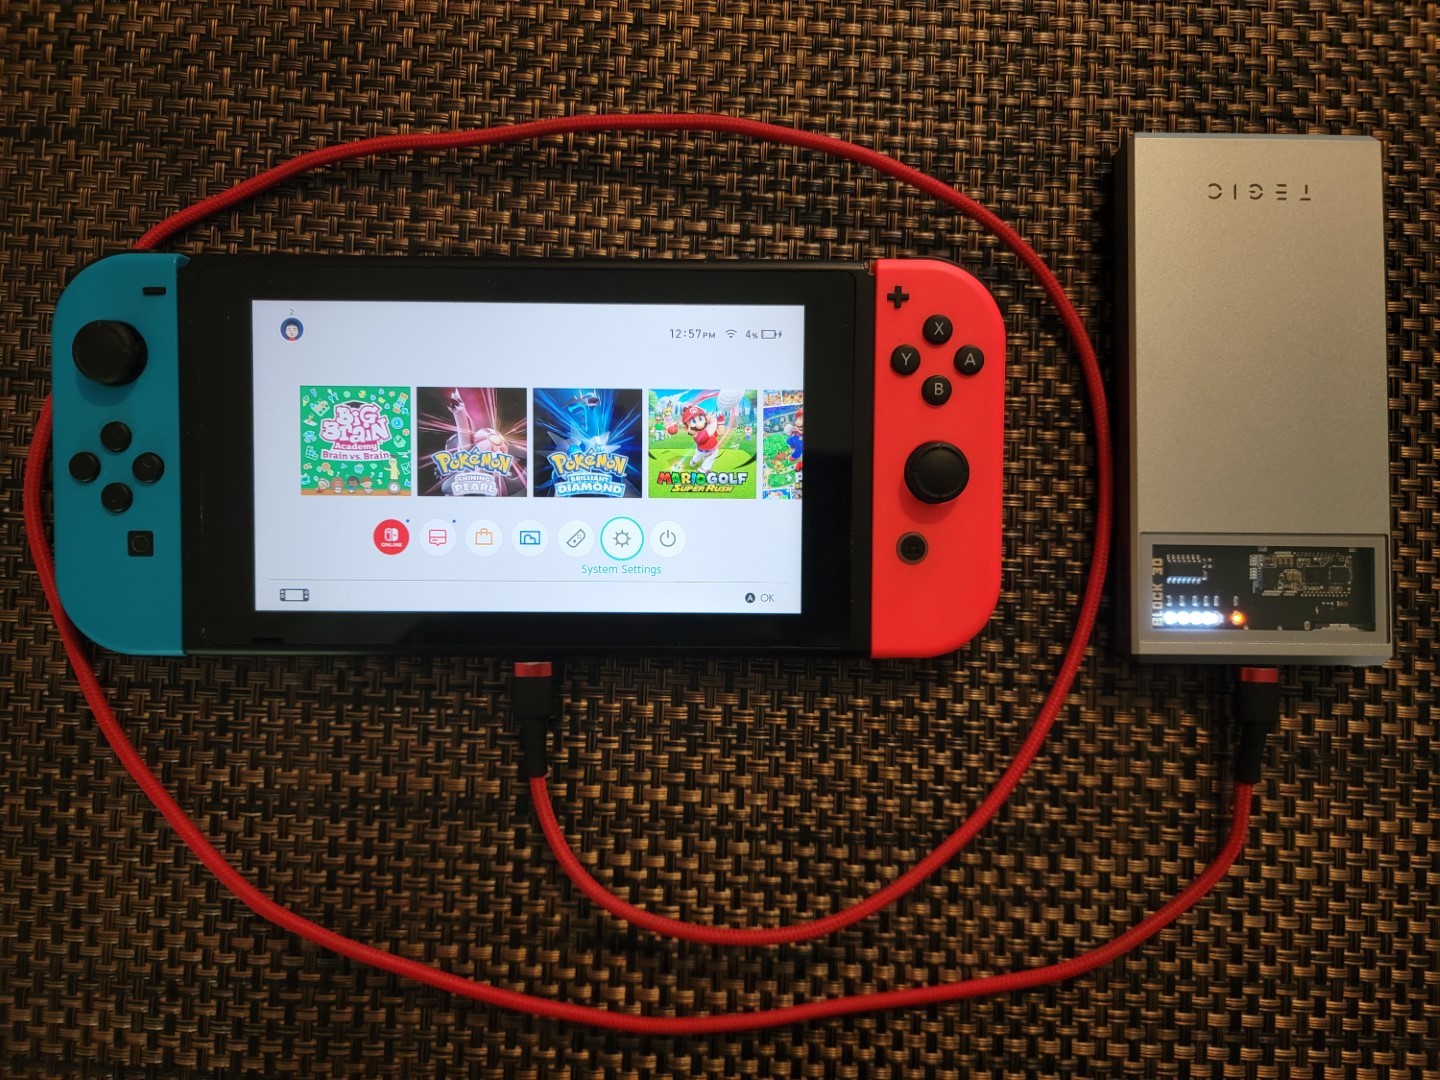 Charging the Nintendo Switch with the TEGIC Block 30 Power bank